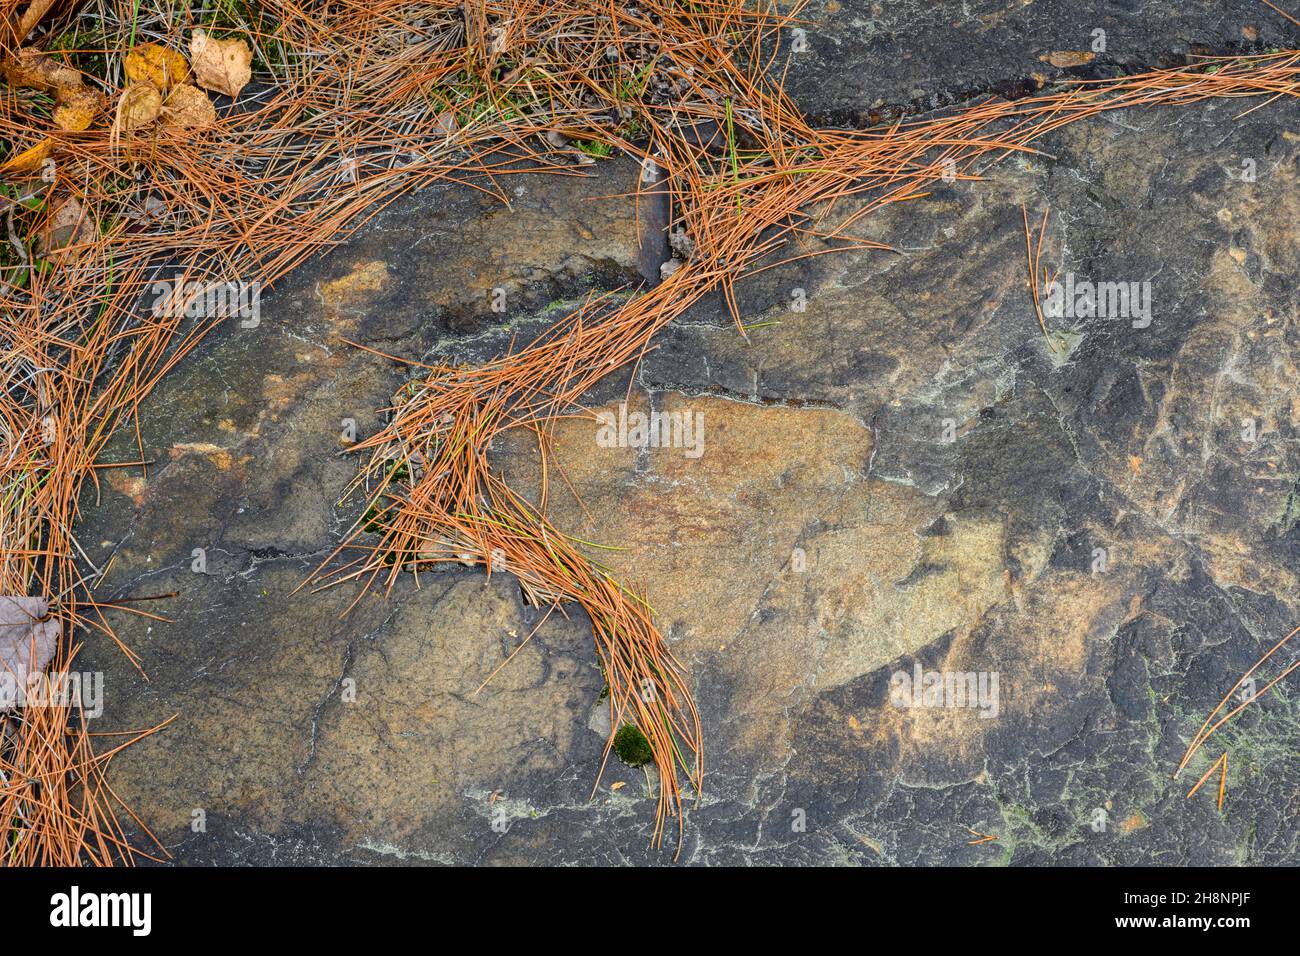 Evidence of revegetation project on exposed rocks along Gibson Road- Fallen leaves and pine needles, Greater Sudbury, Ontario, Canada Stock Photo